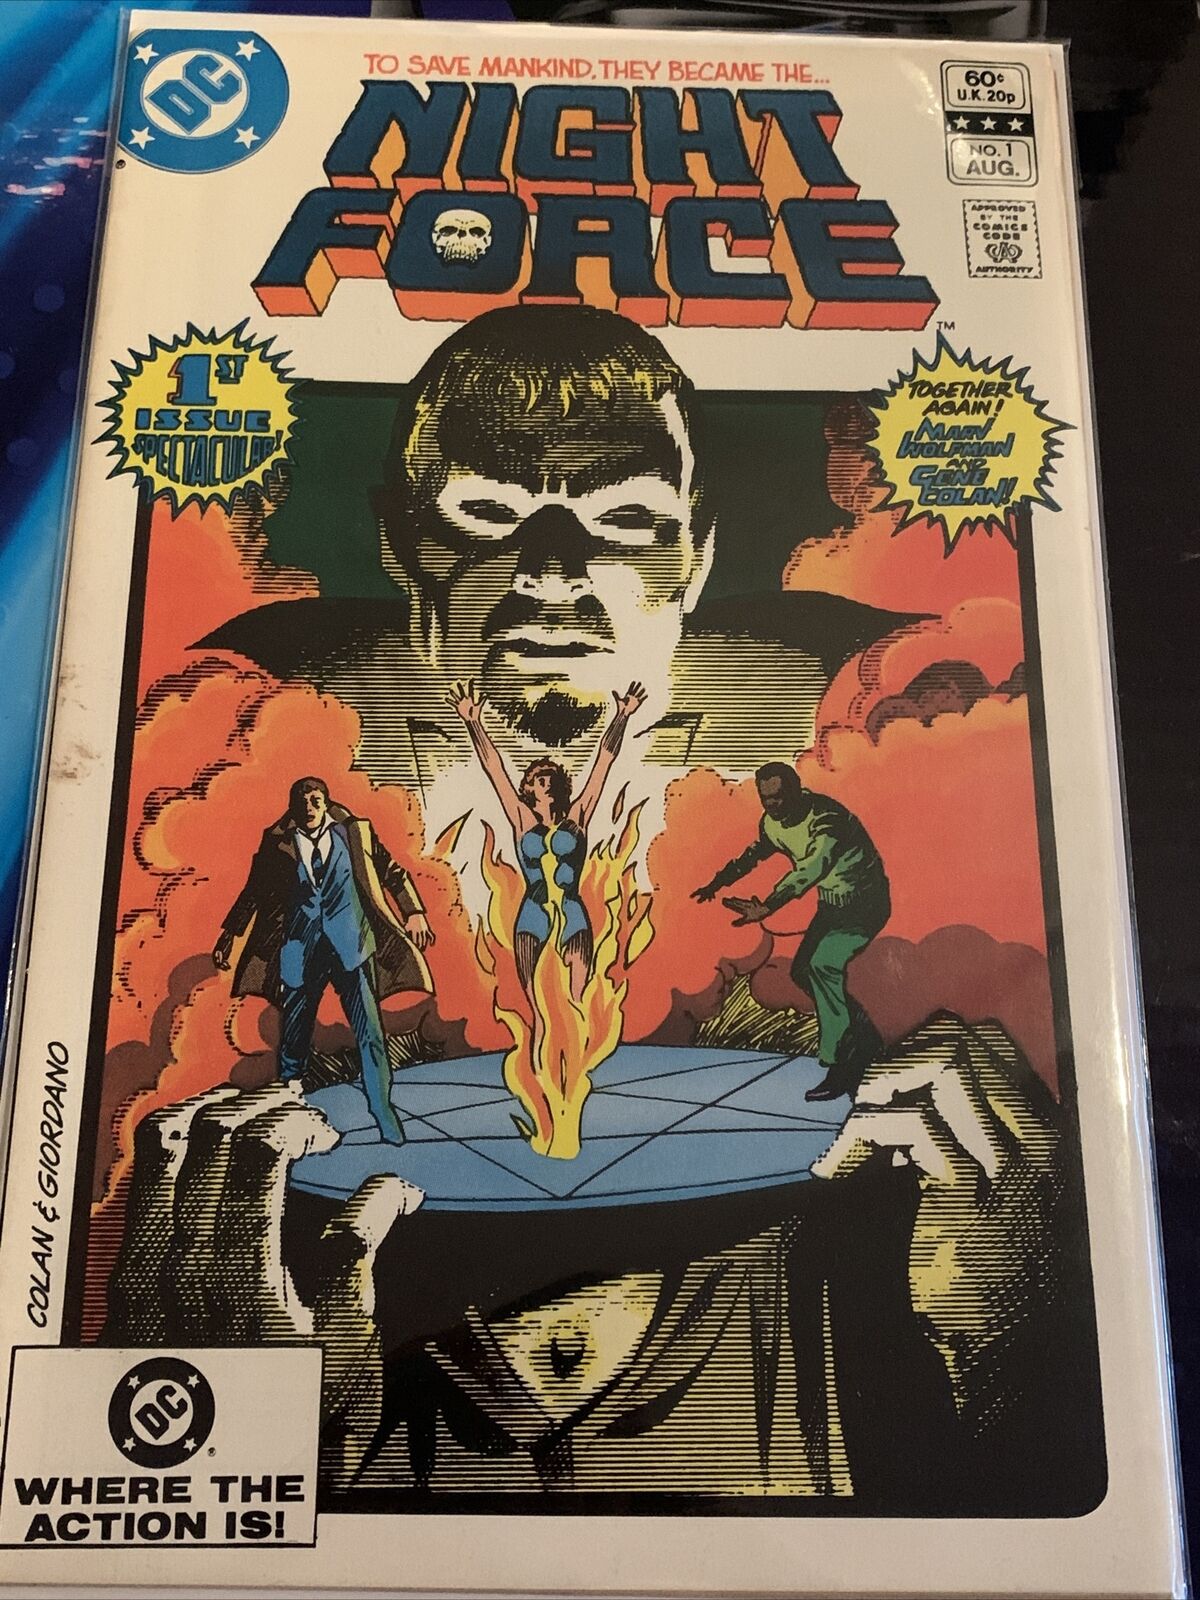 DC NIGHT FORCE NO 1, 1982, AND NO 3-7